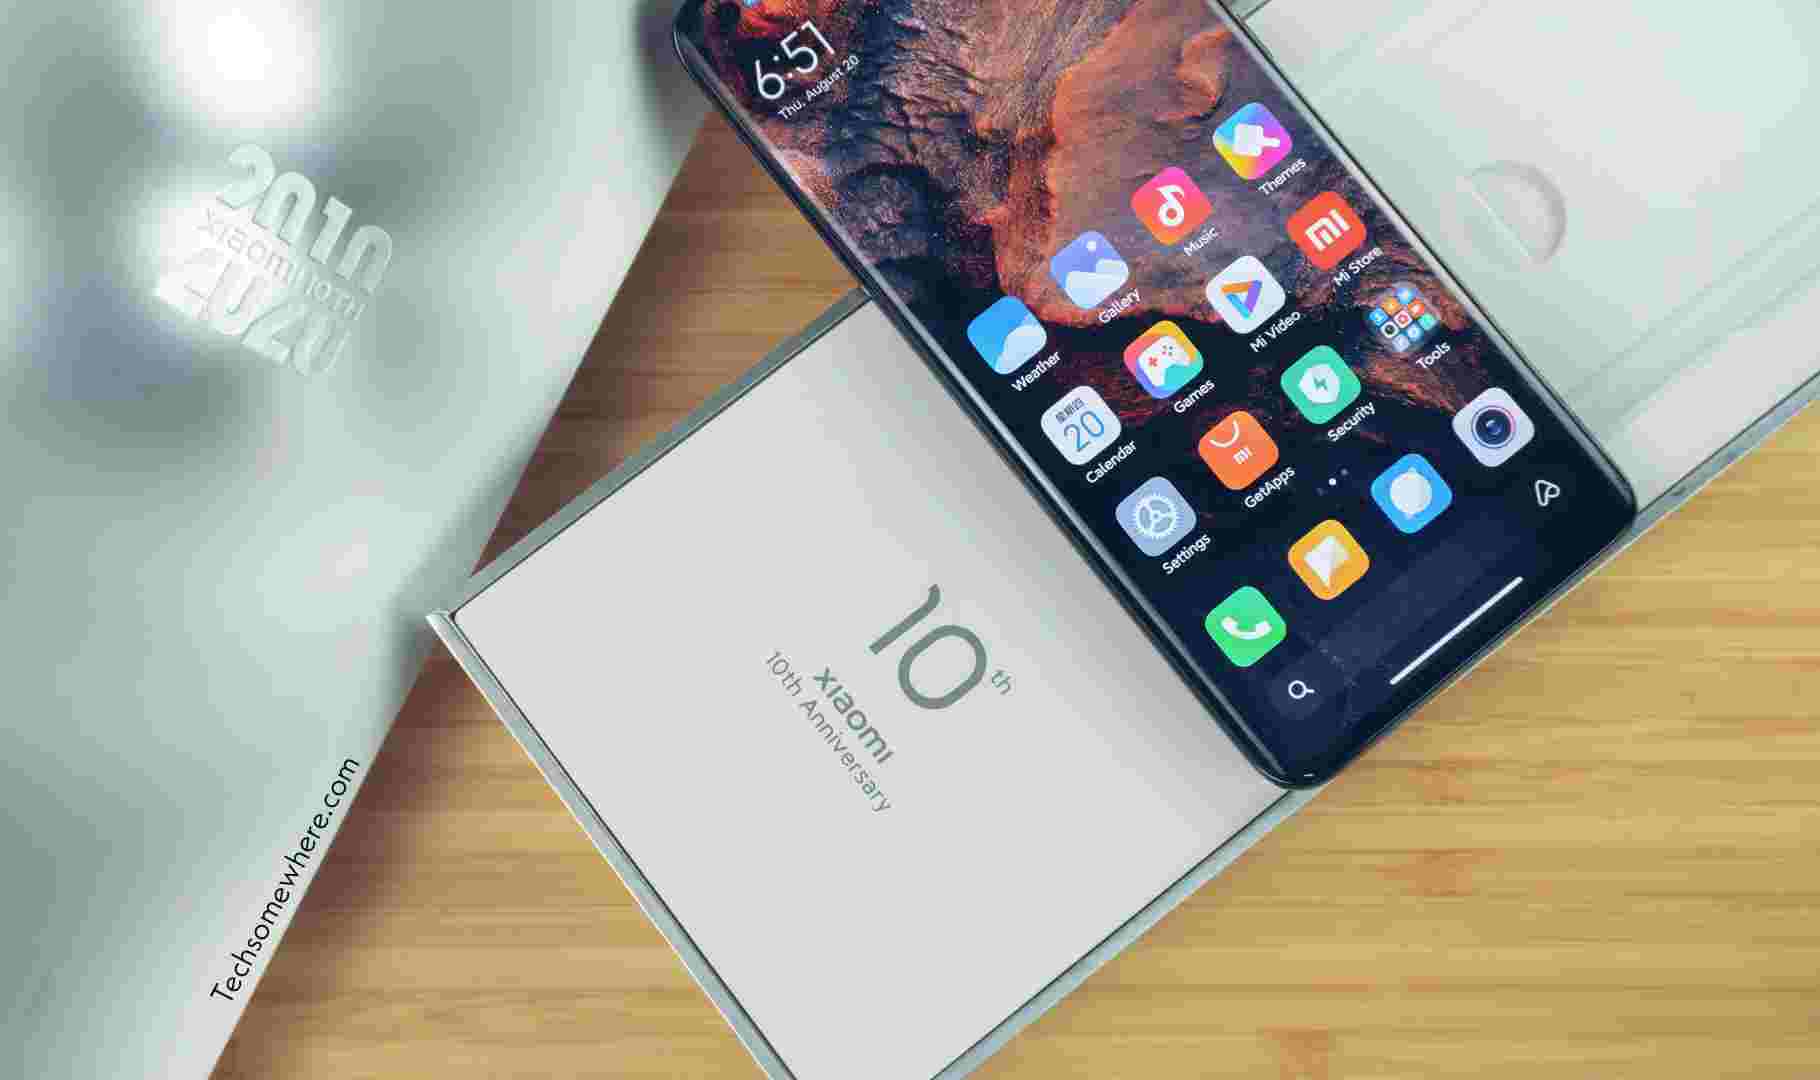 Xiaomi 10 Ultra Price in Qatar, Full Specs and Features - Techsomewhere